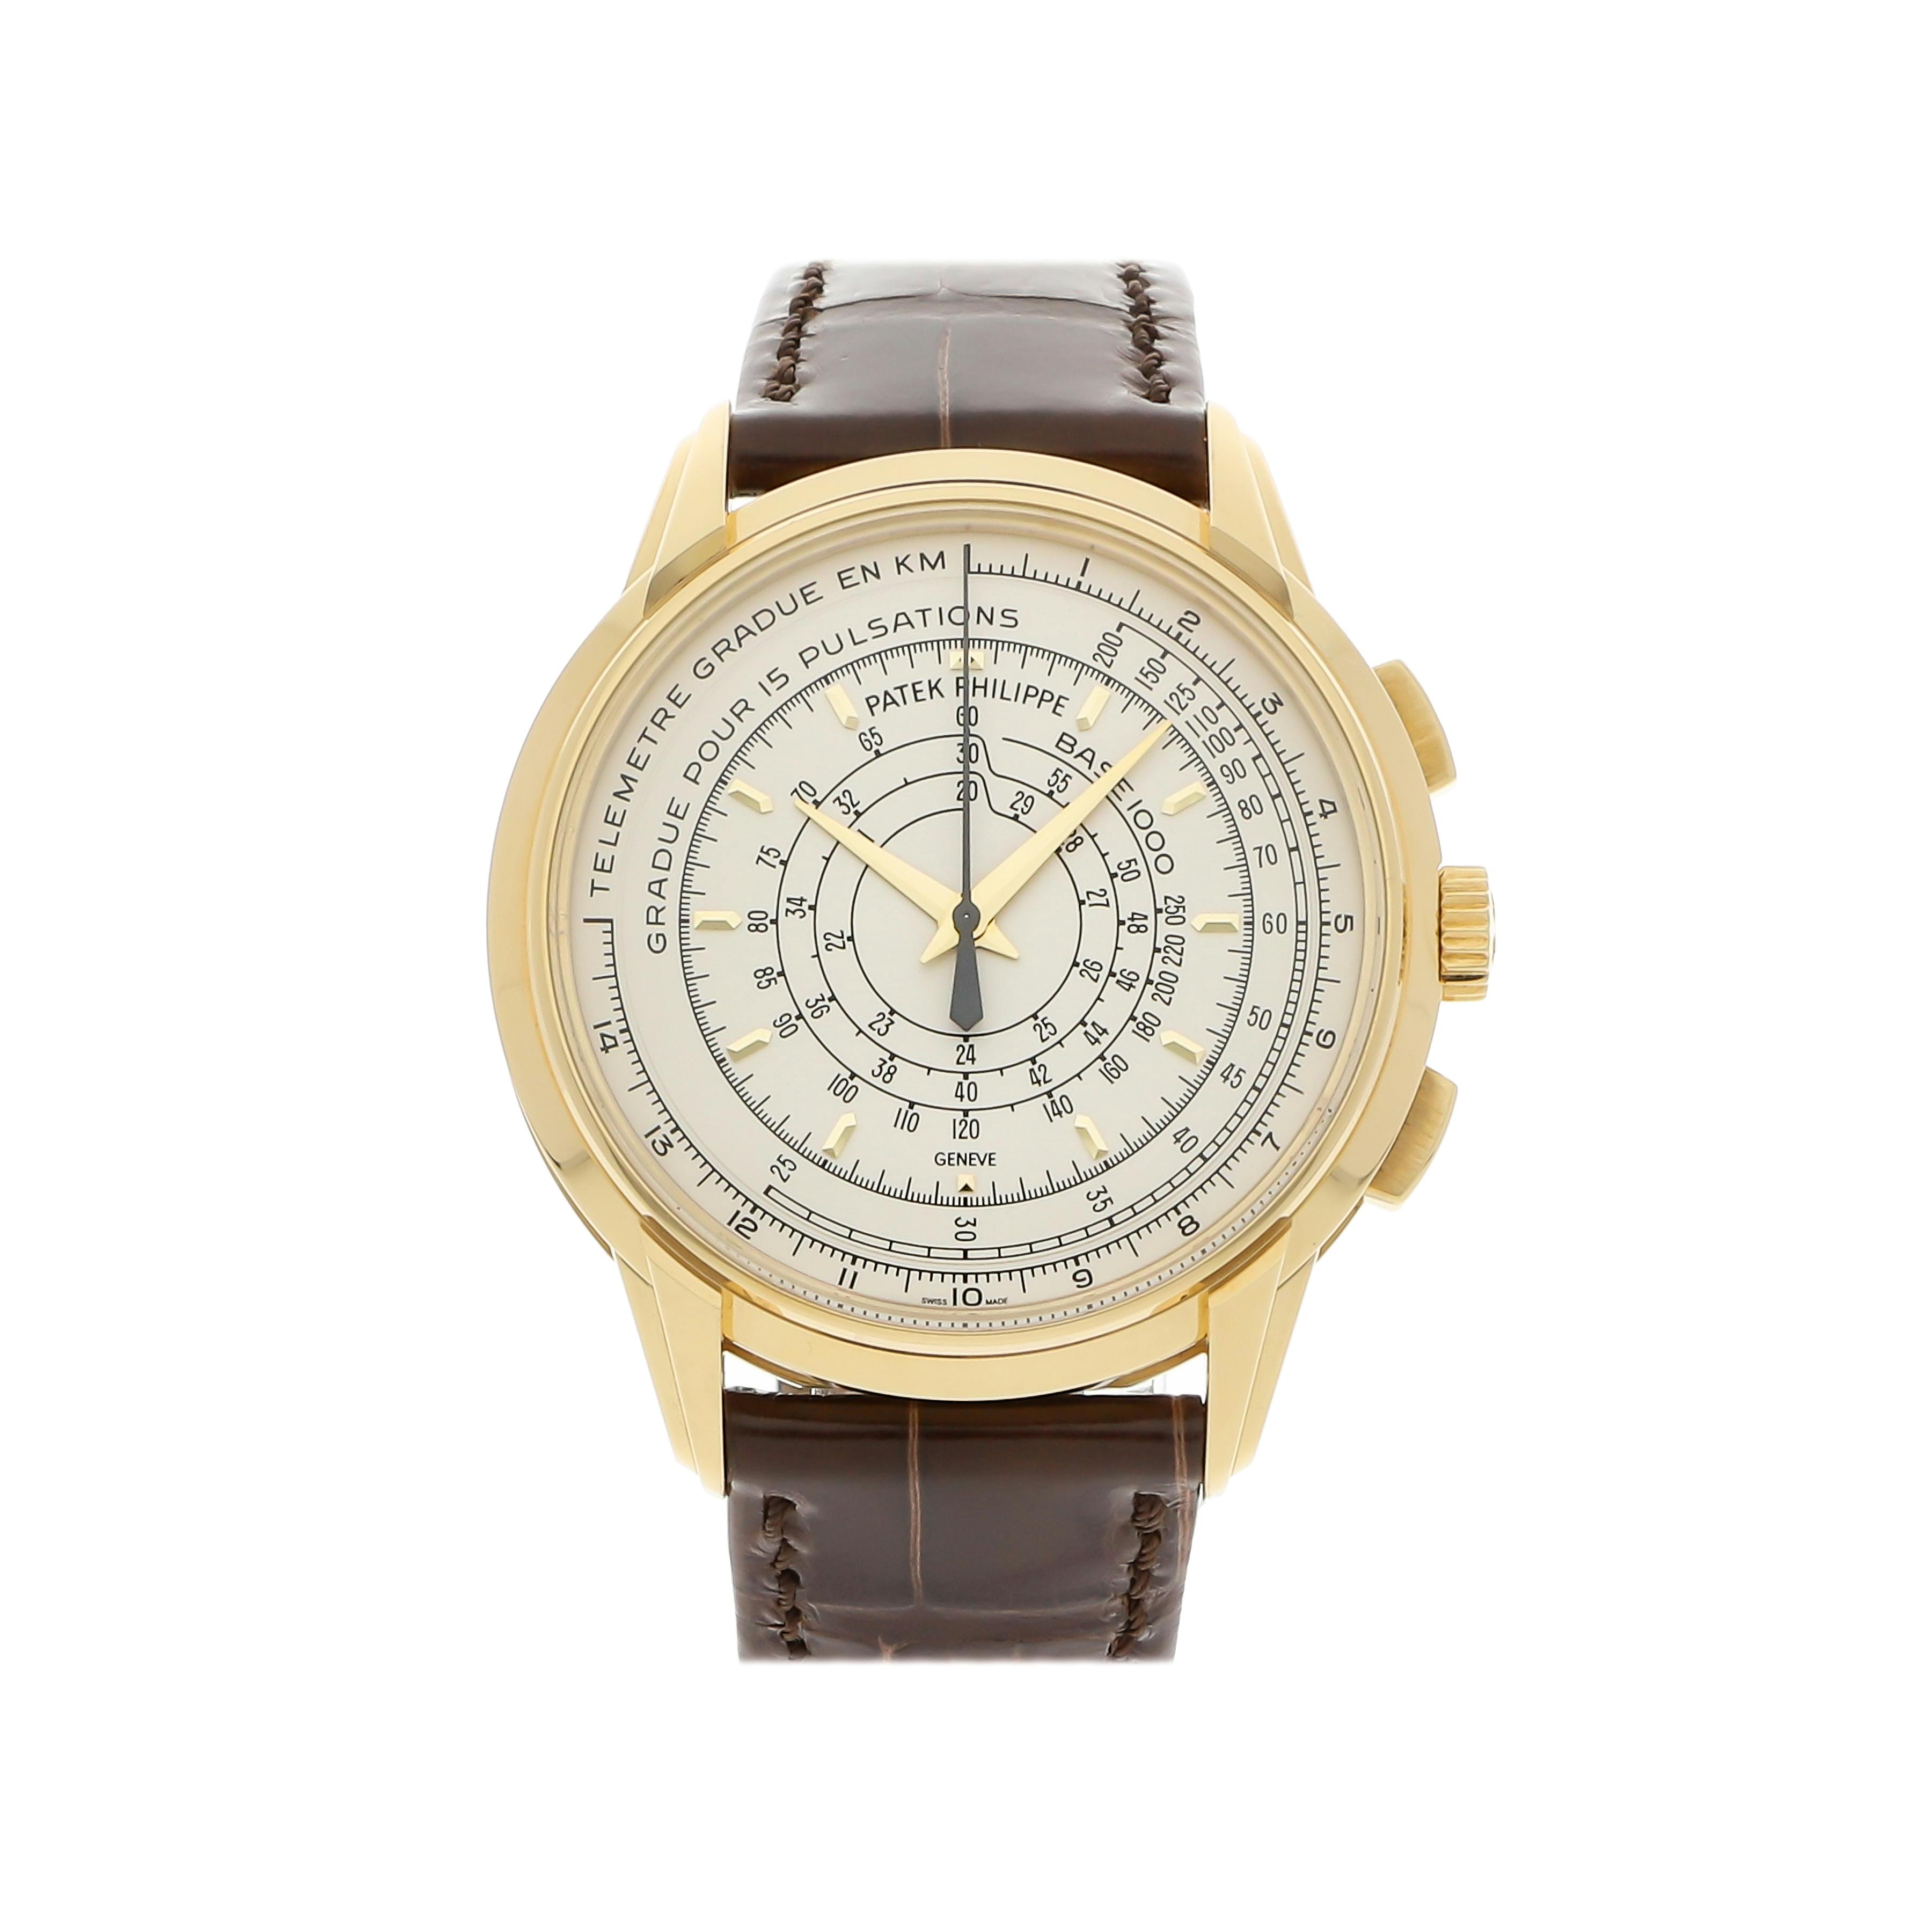 Patek Philippe Nautilus for Rs.9,765,141 for sale from a Seller on Chrono24